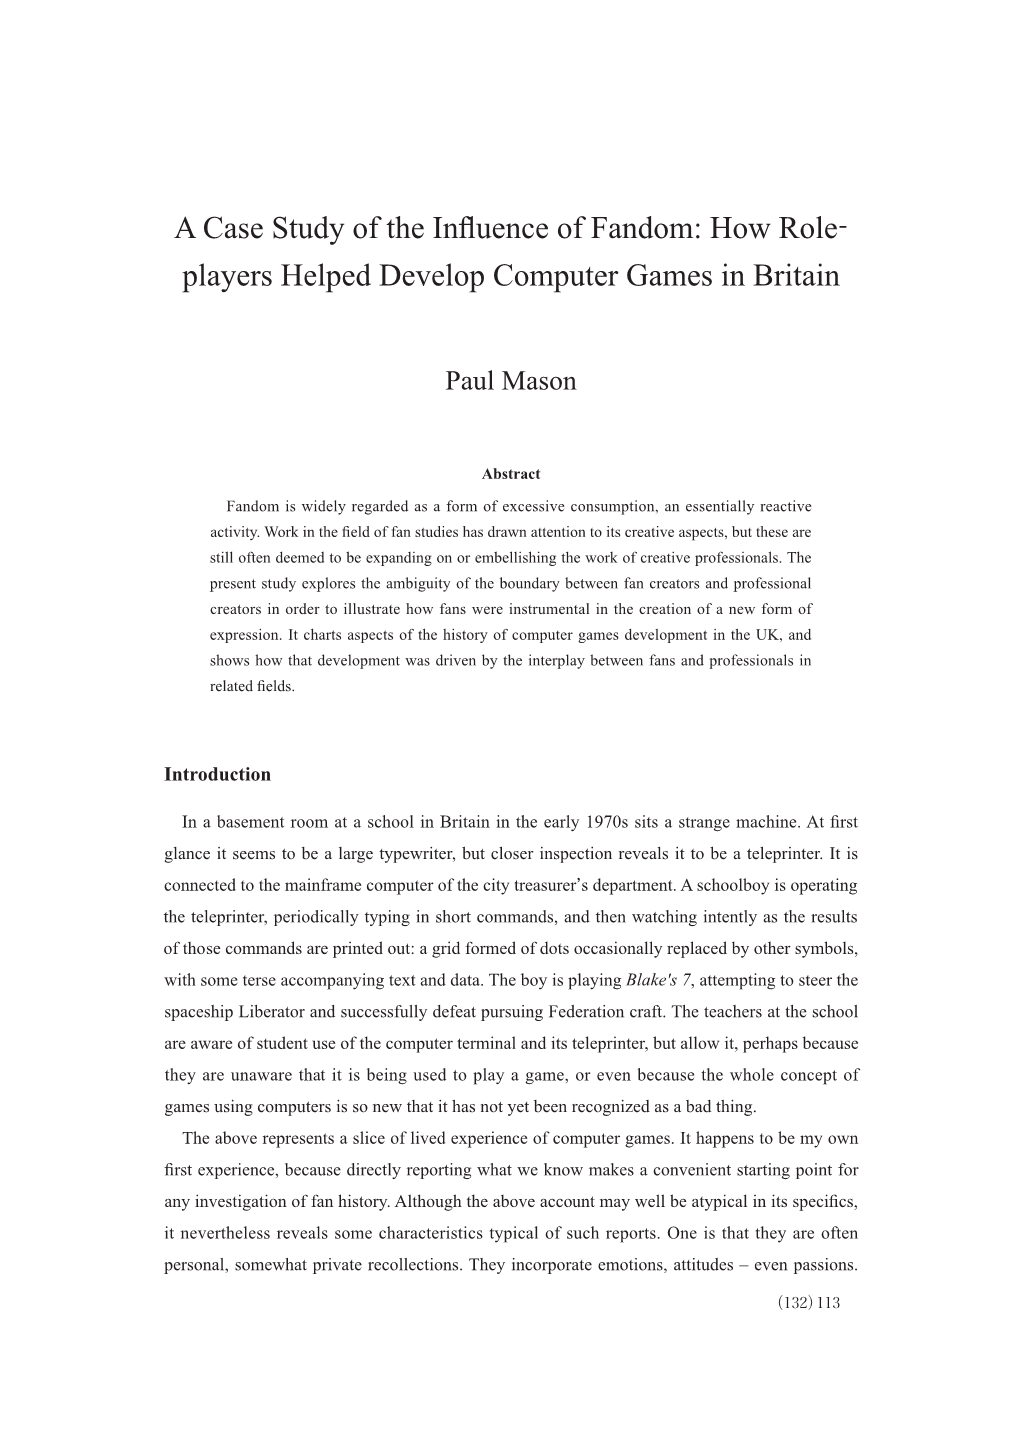 Players Helped Develop Computer Games in Britain（Paul Mason）